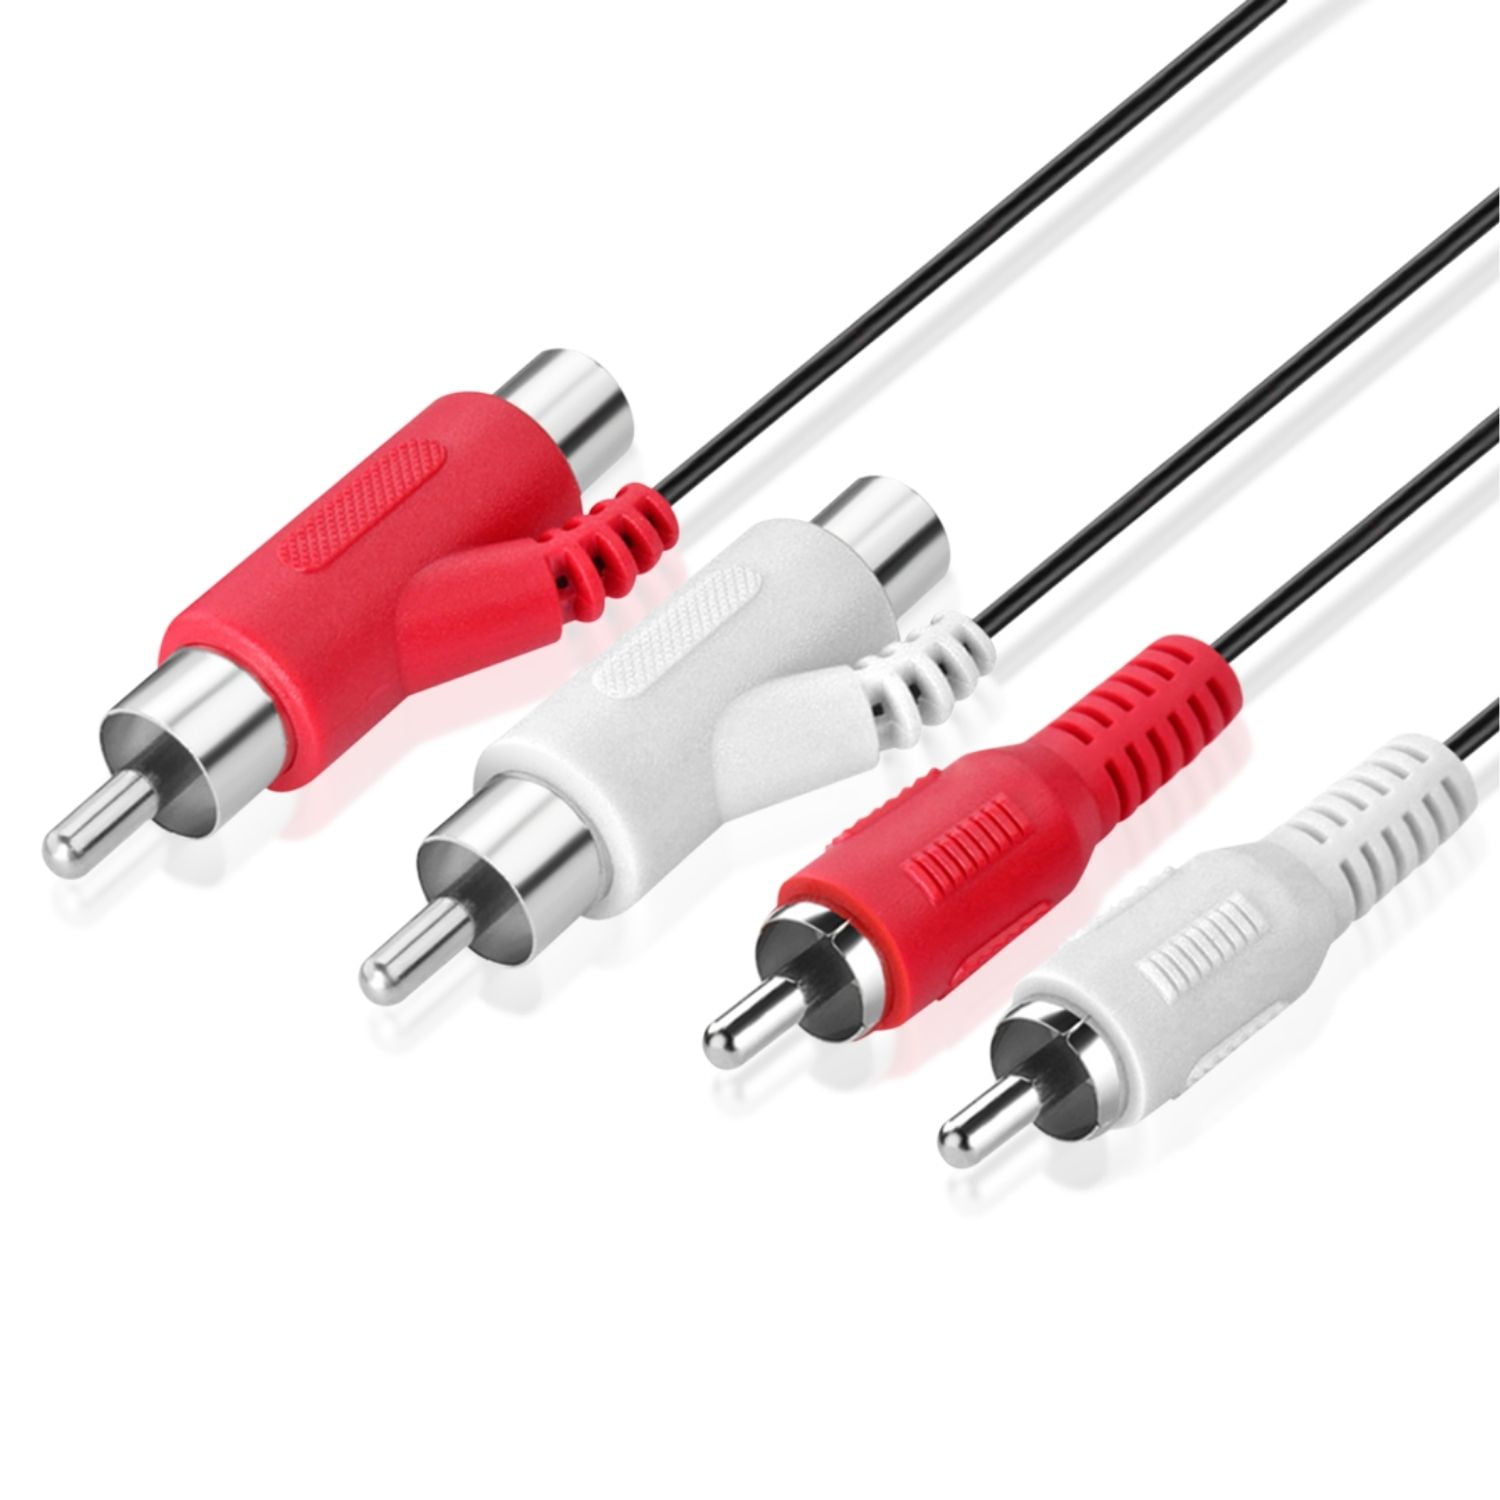 RCA Piggyback Extension Cable (6 Feet) 2RCA Adapter Cord Wire Male to Female Dual Red/White Jack Plug Extend Video Audio 2 Channel Stereo (Right and Left) - Walmart.com